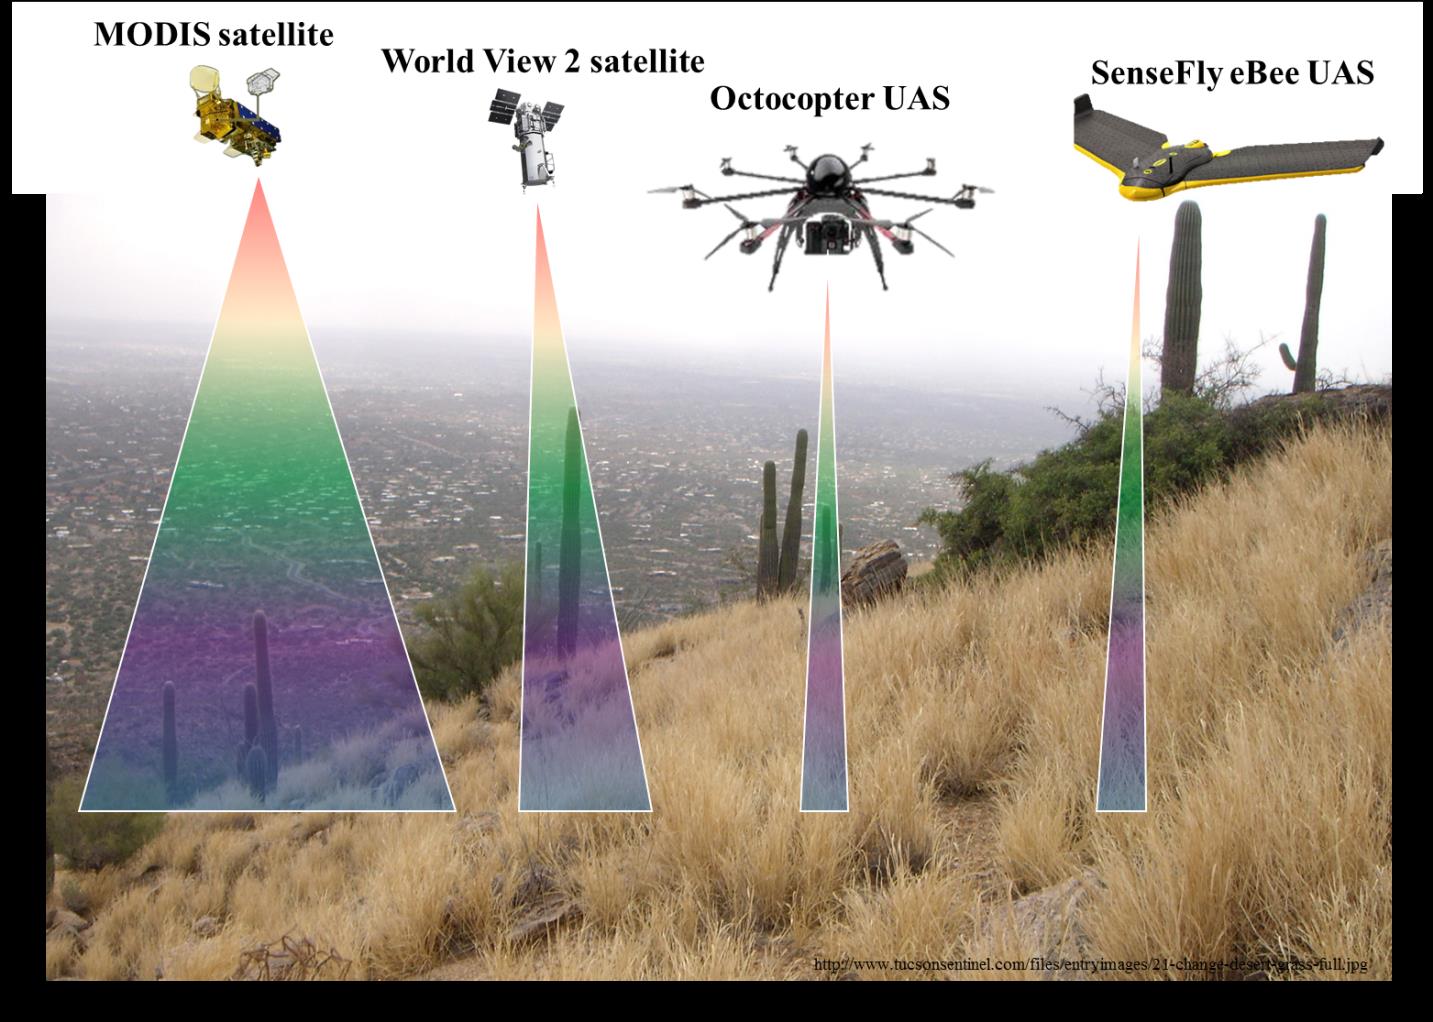 USGS and NAU scientists are developing a hierarchical, multi-sensor approach to detect buffelgrass at different spatial scales. Scientists are leveraging coarse- and fine-resolution satellite imagery (from MODIS and WorldView-2, respectively) and much finer resolution data from the UAS platforms shown here that carry sensors to acquire multispectral, hyperspectral, photogrammetric, and lidar measurements of vegetation, soil, and topography.